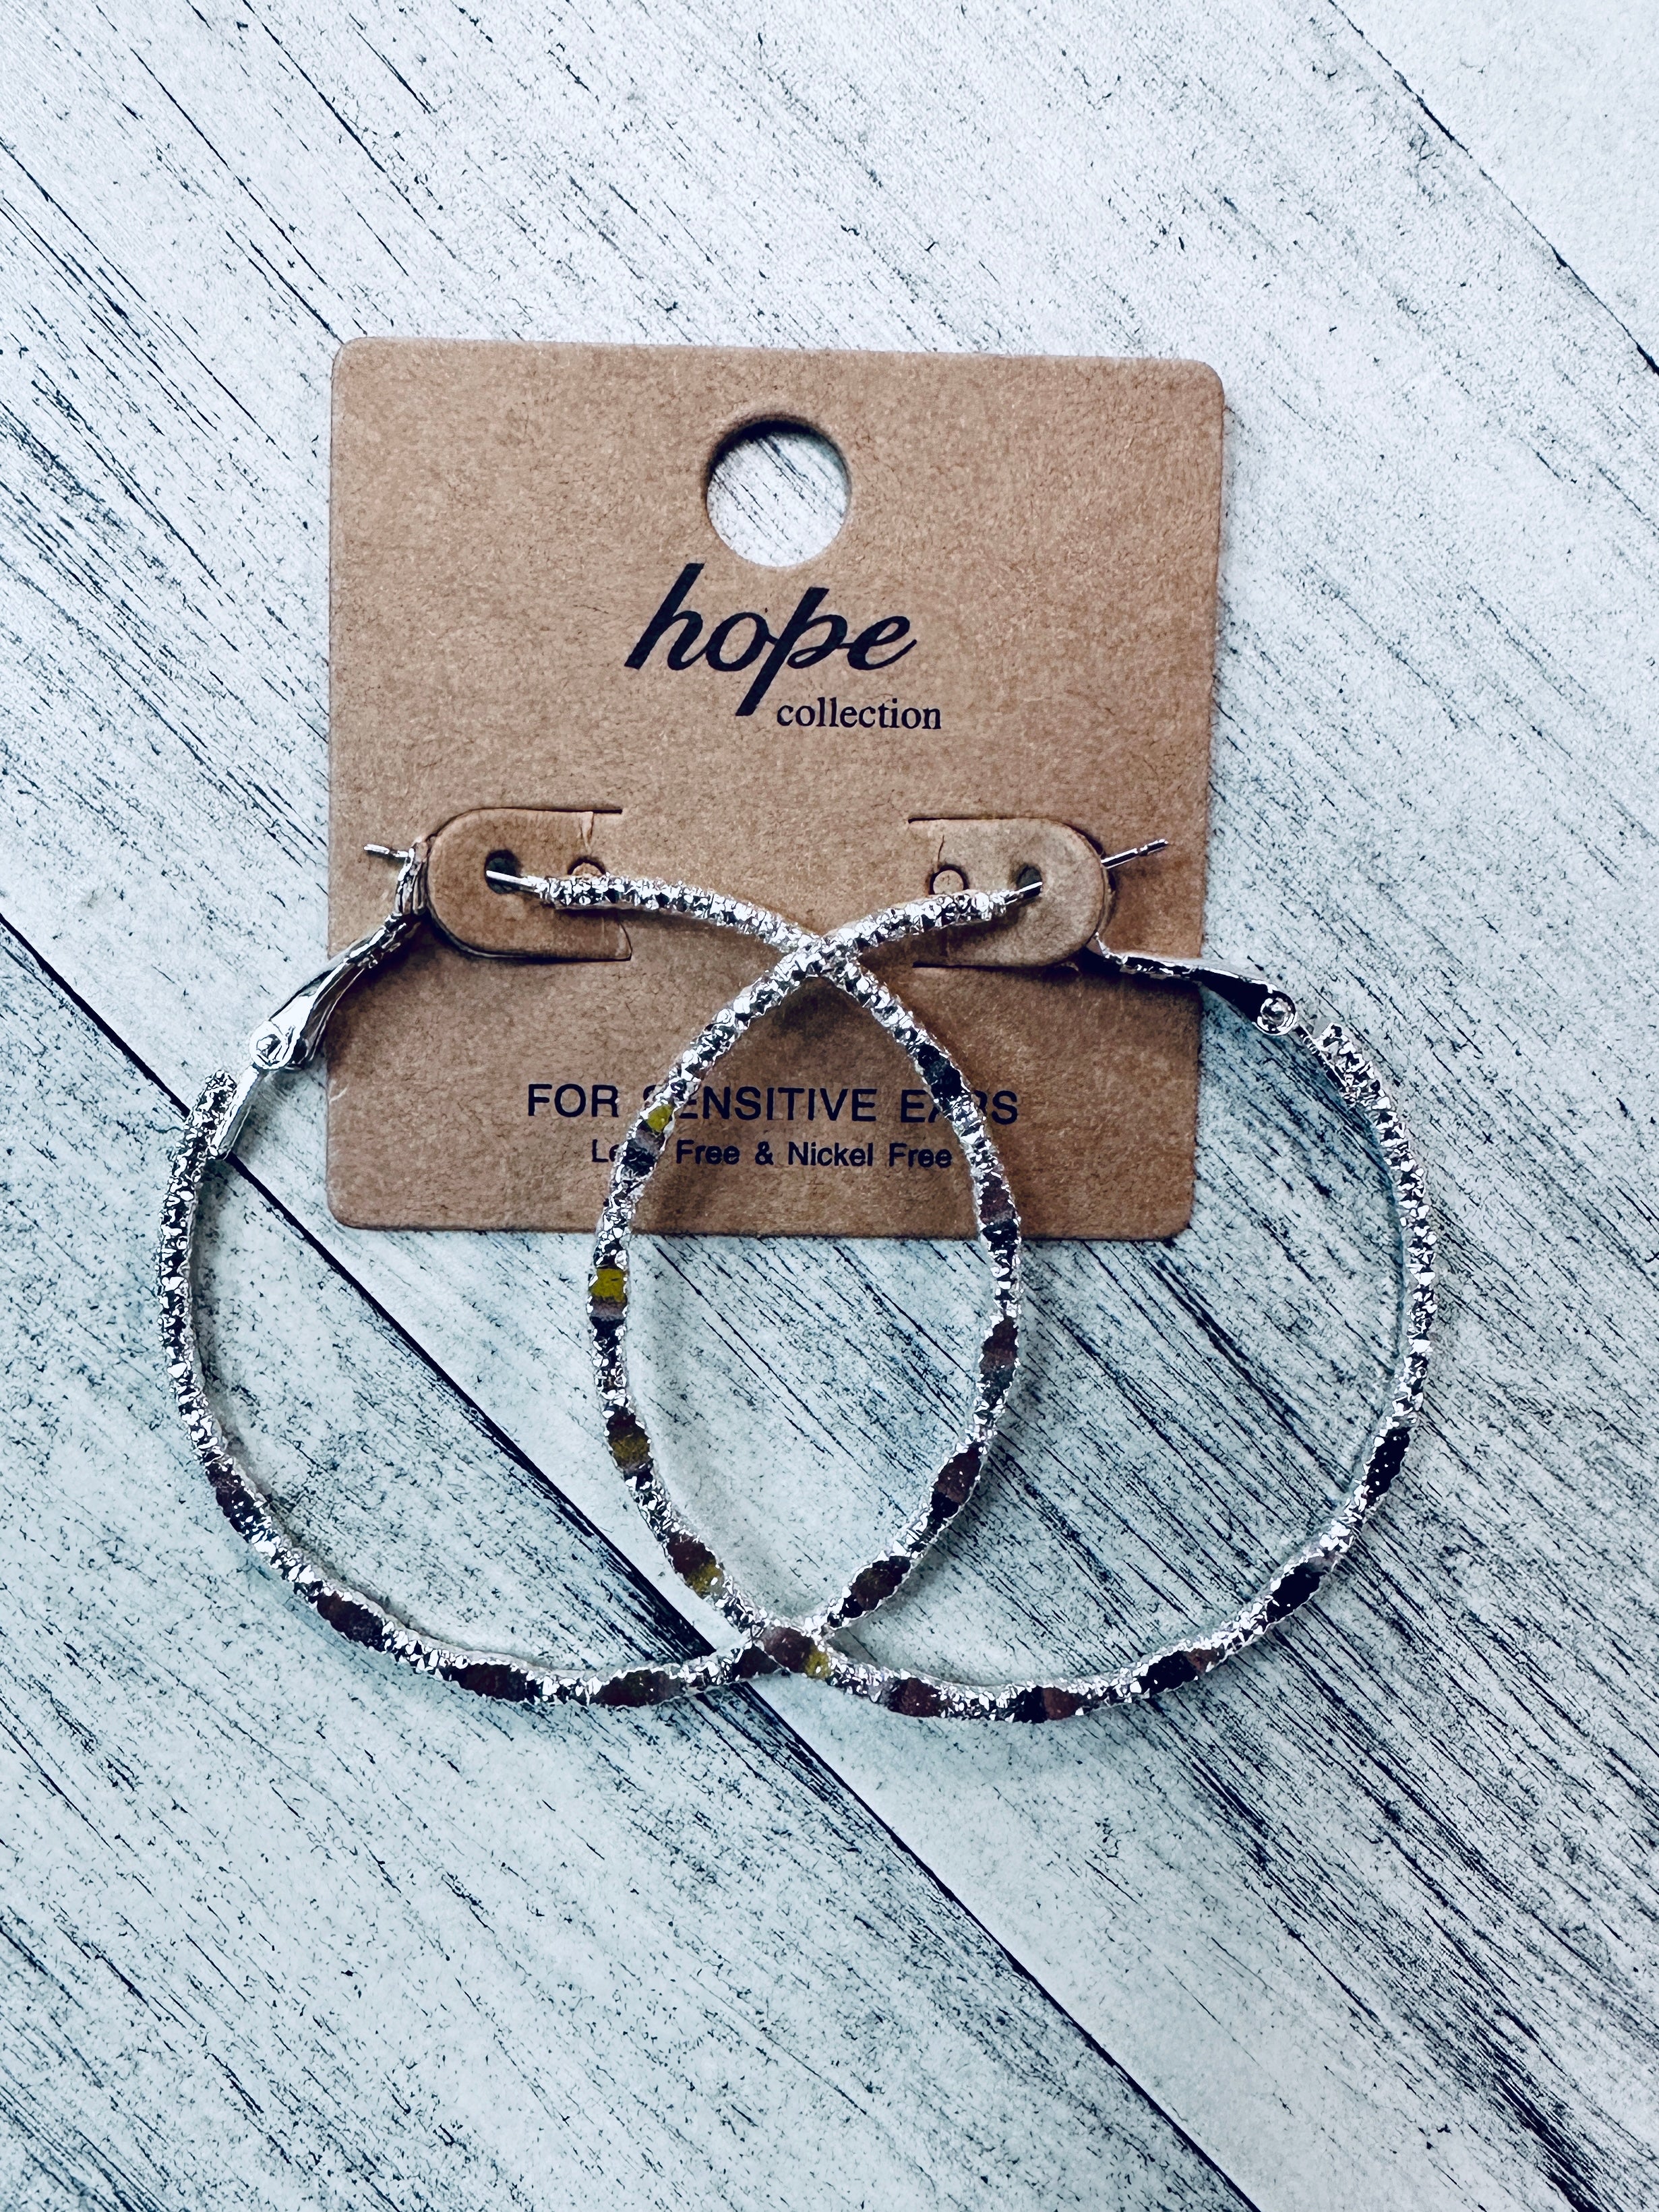 Thin Silver Hoops